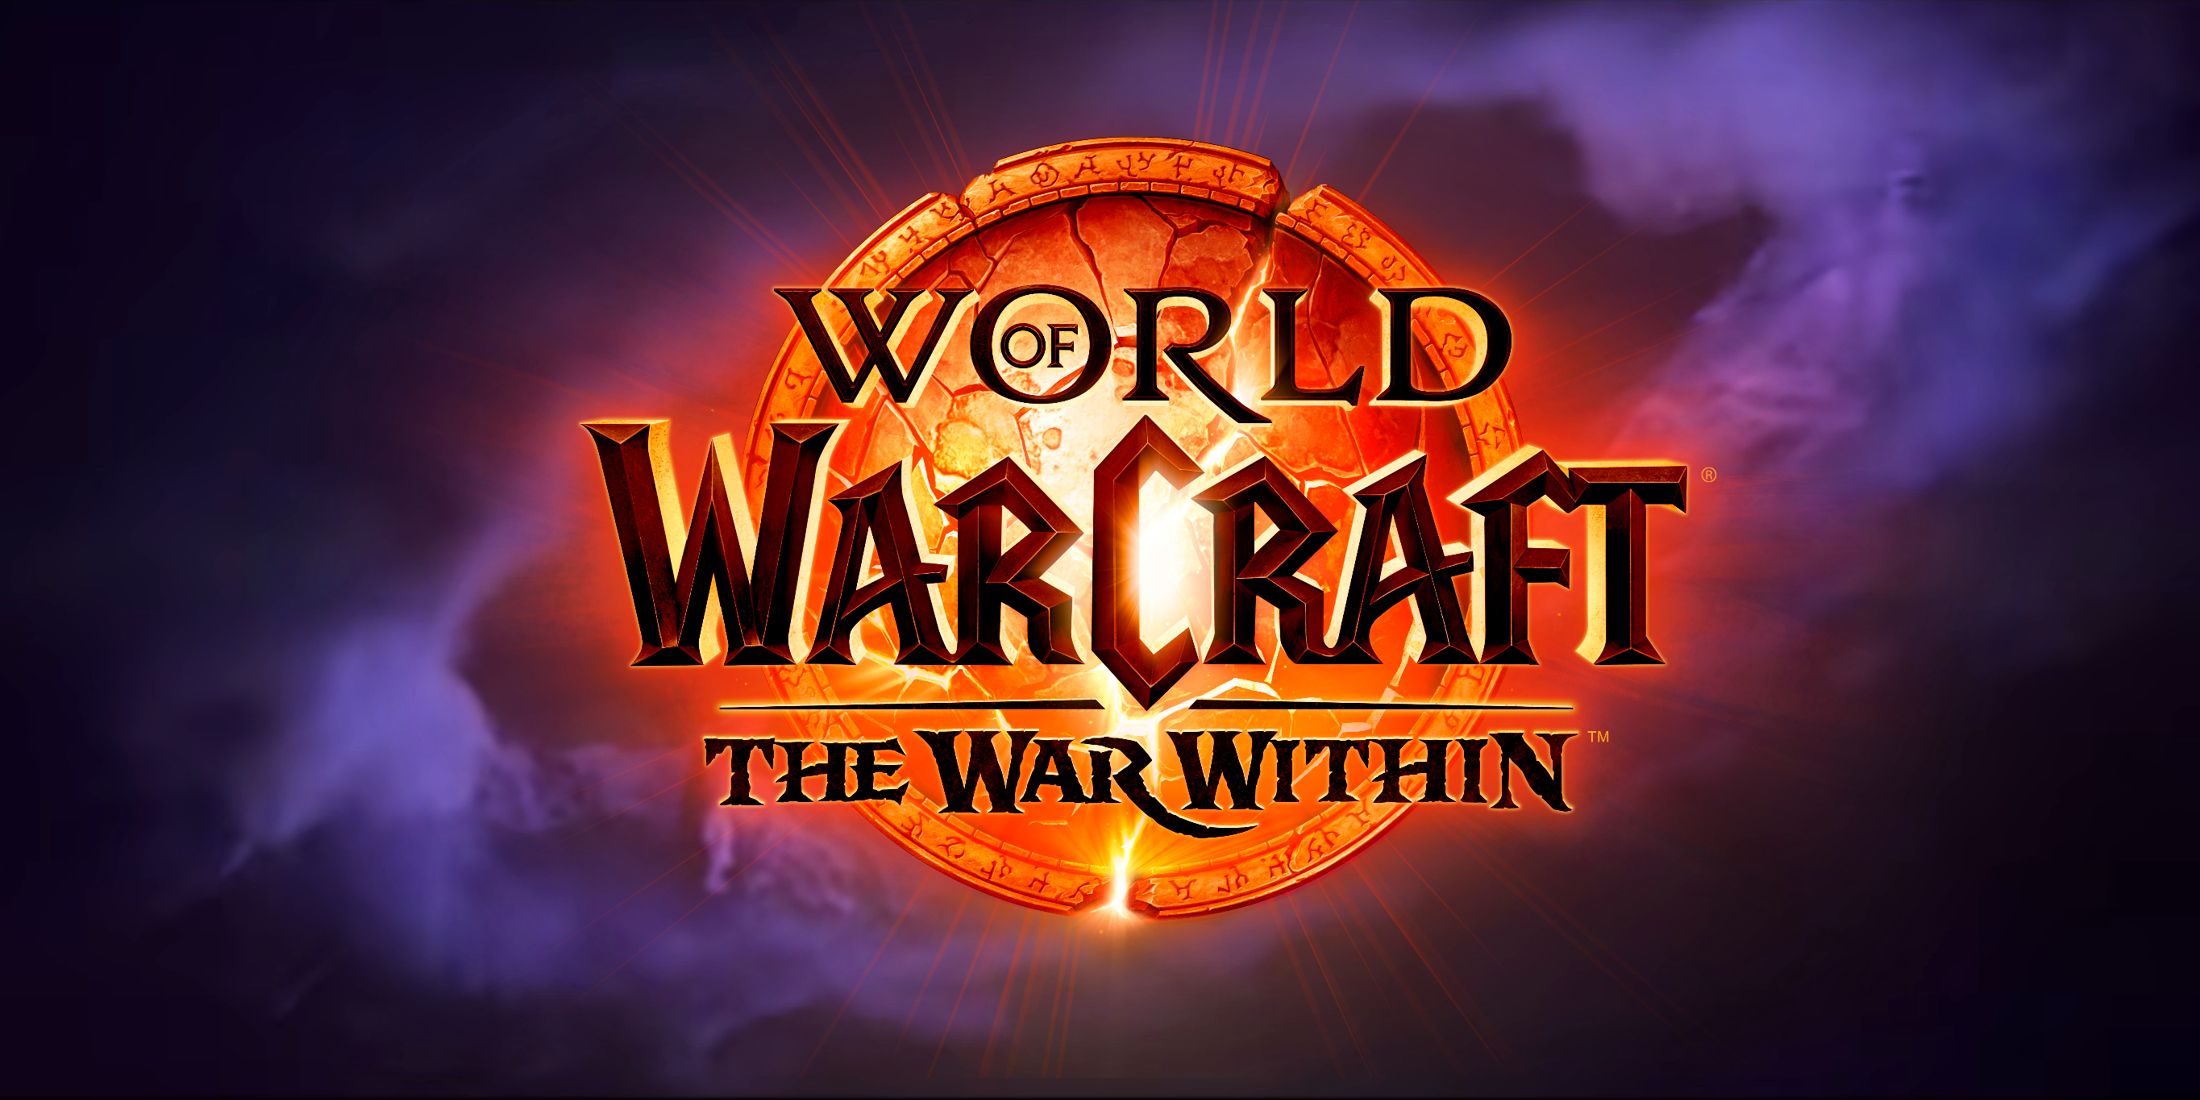 the war within logo in front of the azeroth worlsoul from wow tww trailer